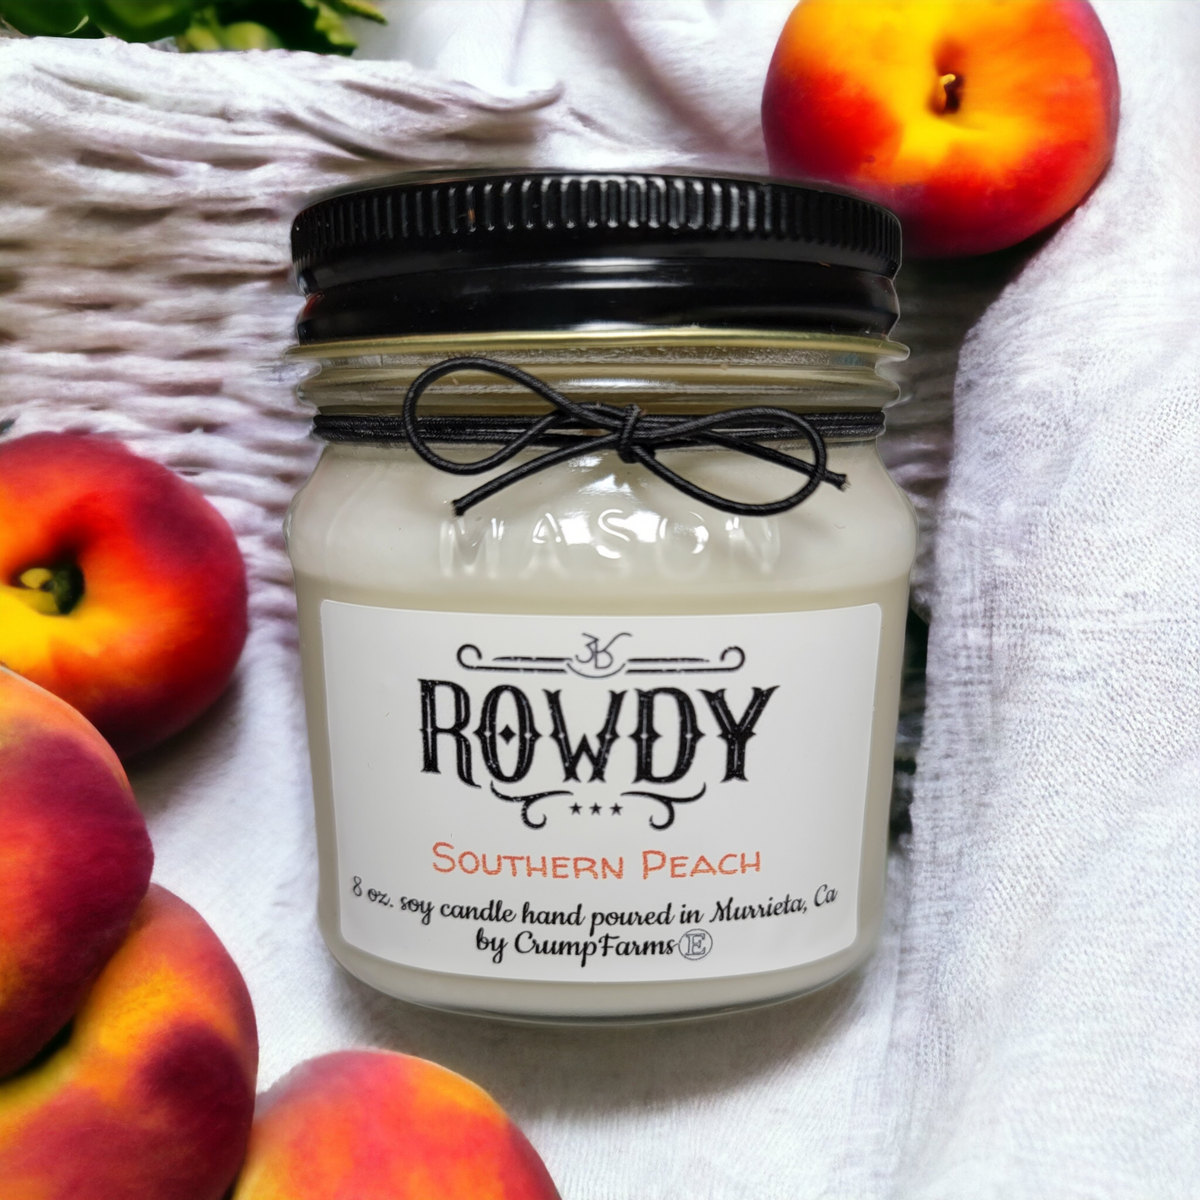 Southern Peach candle